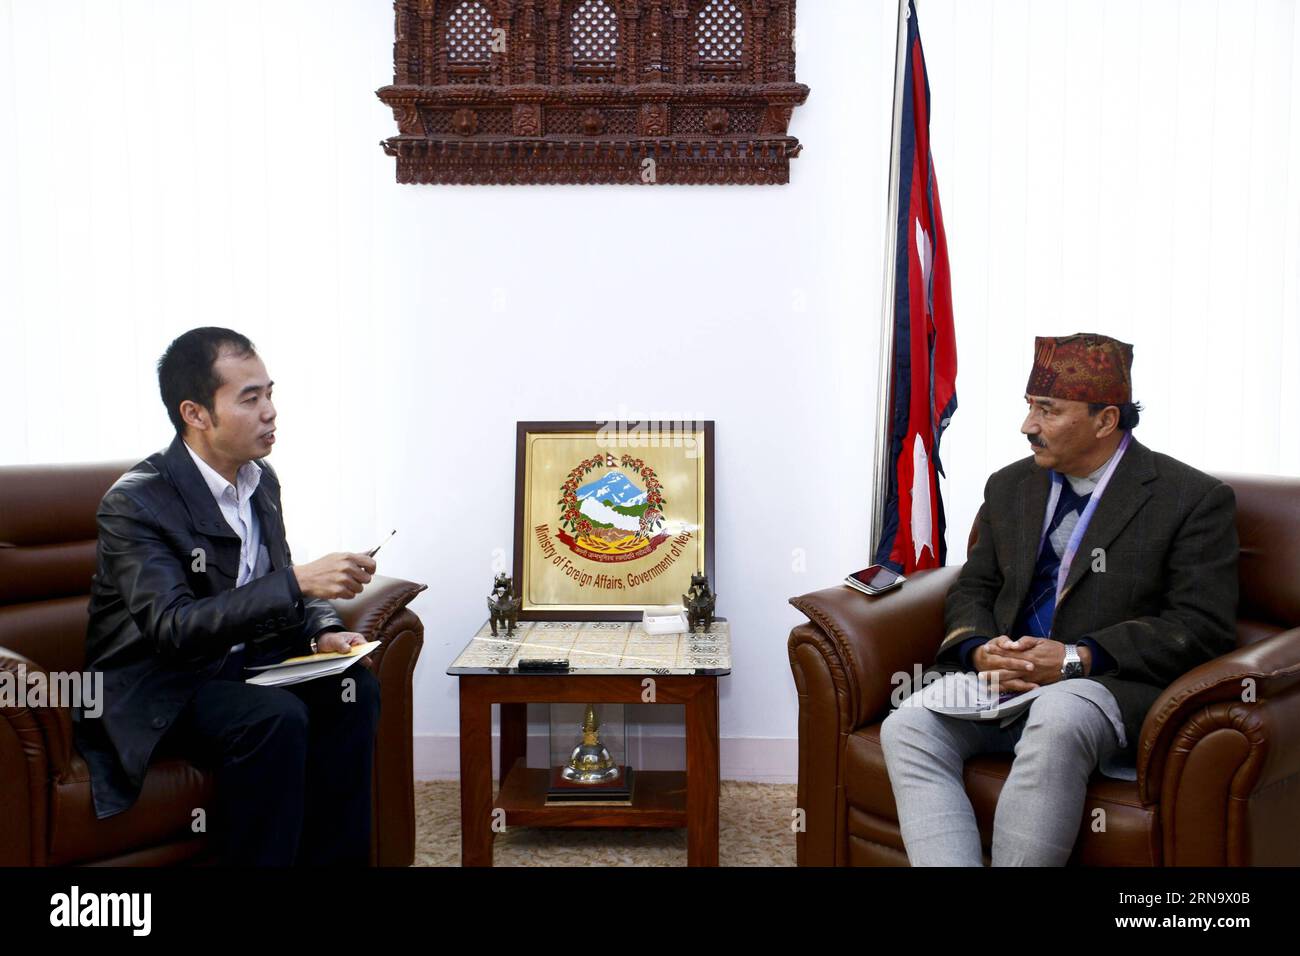 (151222) -- KATHMANDU, Dec. 22, 2015 -- Nepal s Deputy Prime Minister and Minister for Foreign Affairs Kamal Thapa (R) receives an interview with Xinhua before his five-day official visit to China, in Kathmandu, Nepal, Dec. 22, 2015. Kamal Thapa will leave for China on Wednesday. During the visit, Nepal is expected to seal a trade and transit agreement with China as well as finalize the details for importing petroleum products from the northern neighbor on a commercial basis. ) NEPAL-KATHMANDU-DEPUTY PM-INTERVIEW PratapxThapa PUBLICATIONxNOTxINxCHN   151222 Kathmandu DEC 22 2015 Nepal S Deputy Stock Photo